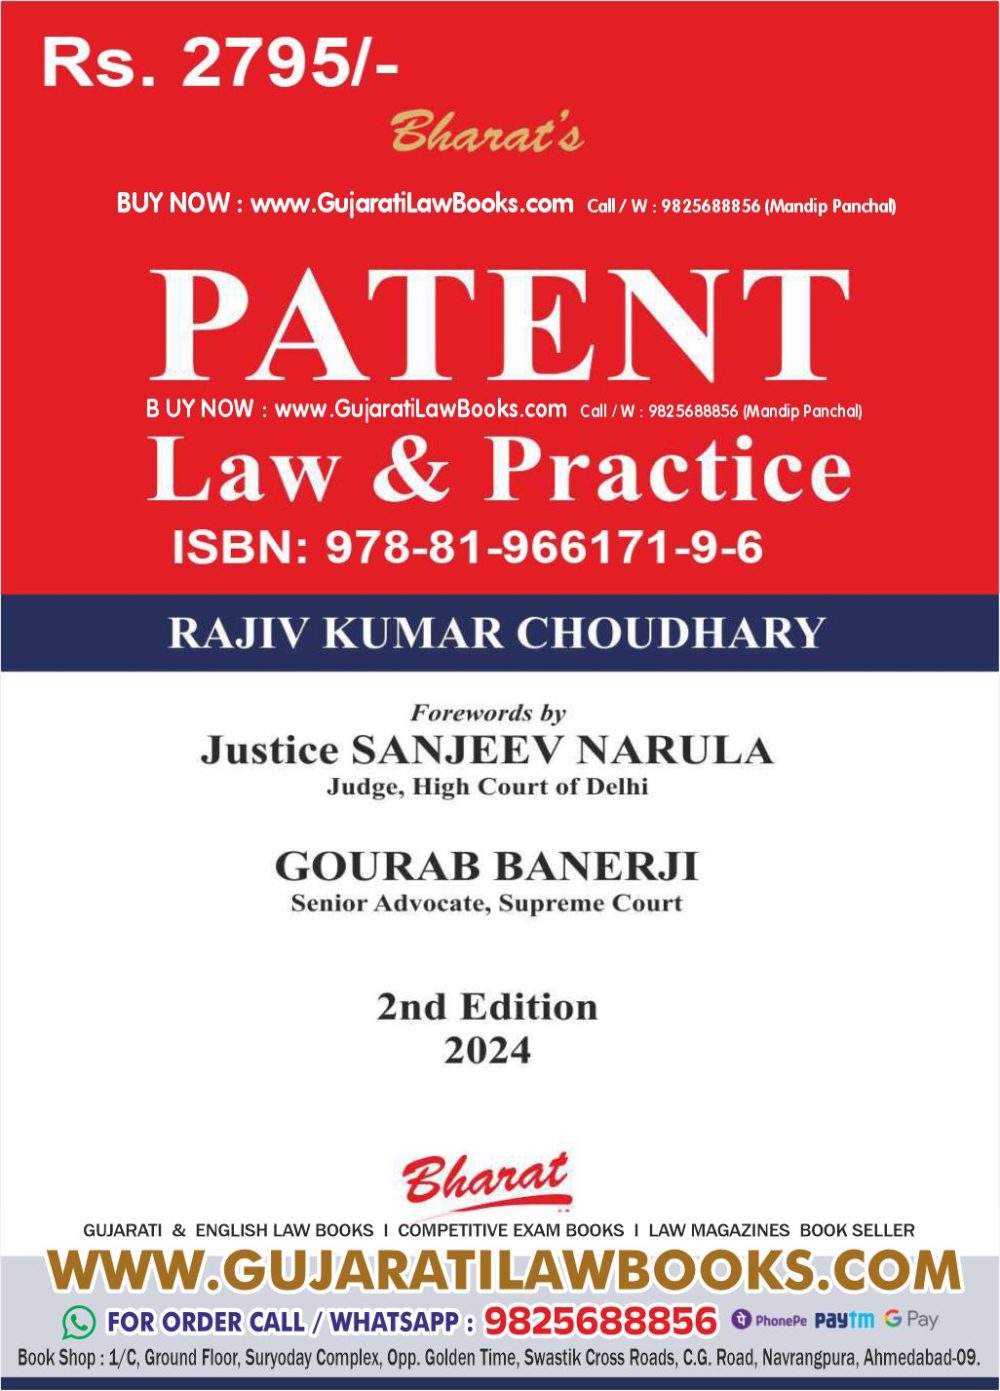 Patent Law & Practice by Gourab Banerji - 2nd Edition 2024 Bharat